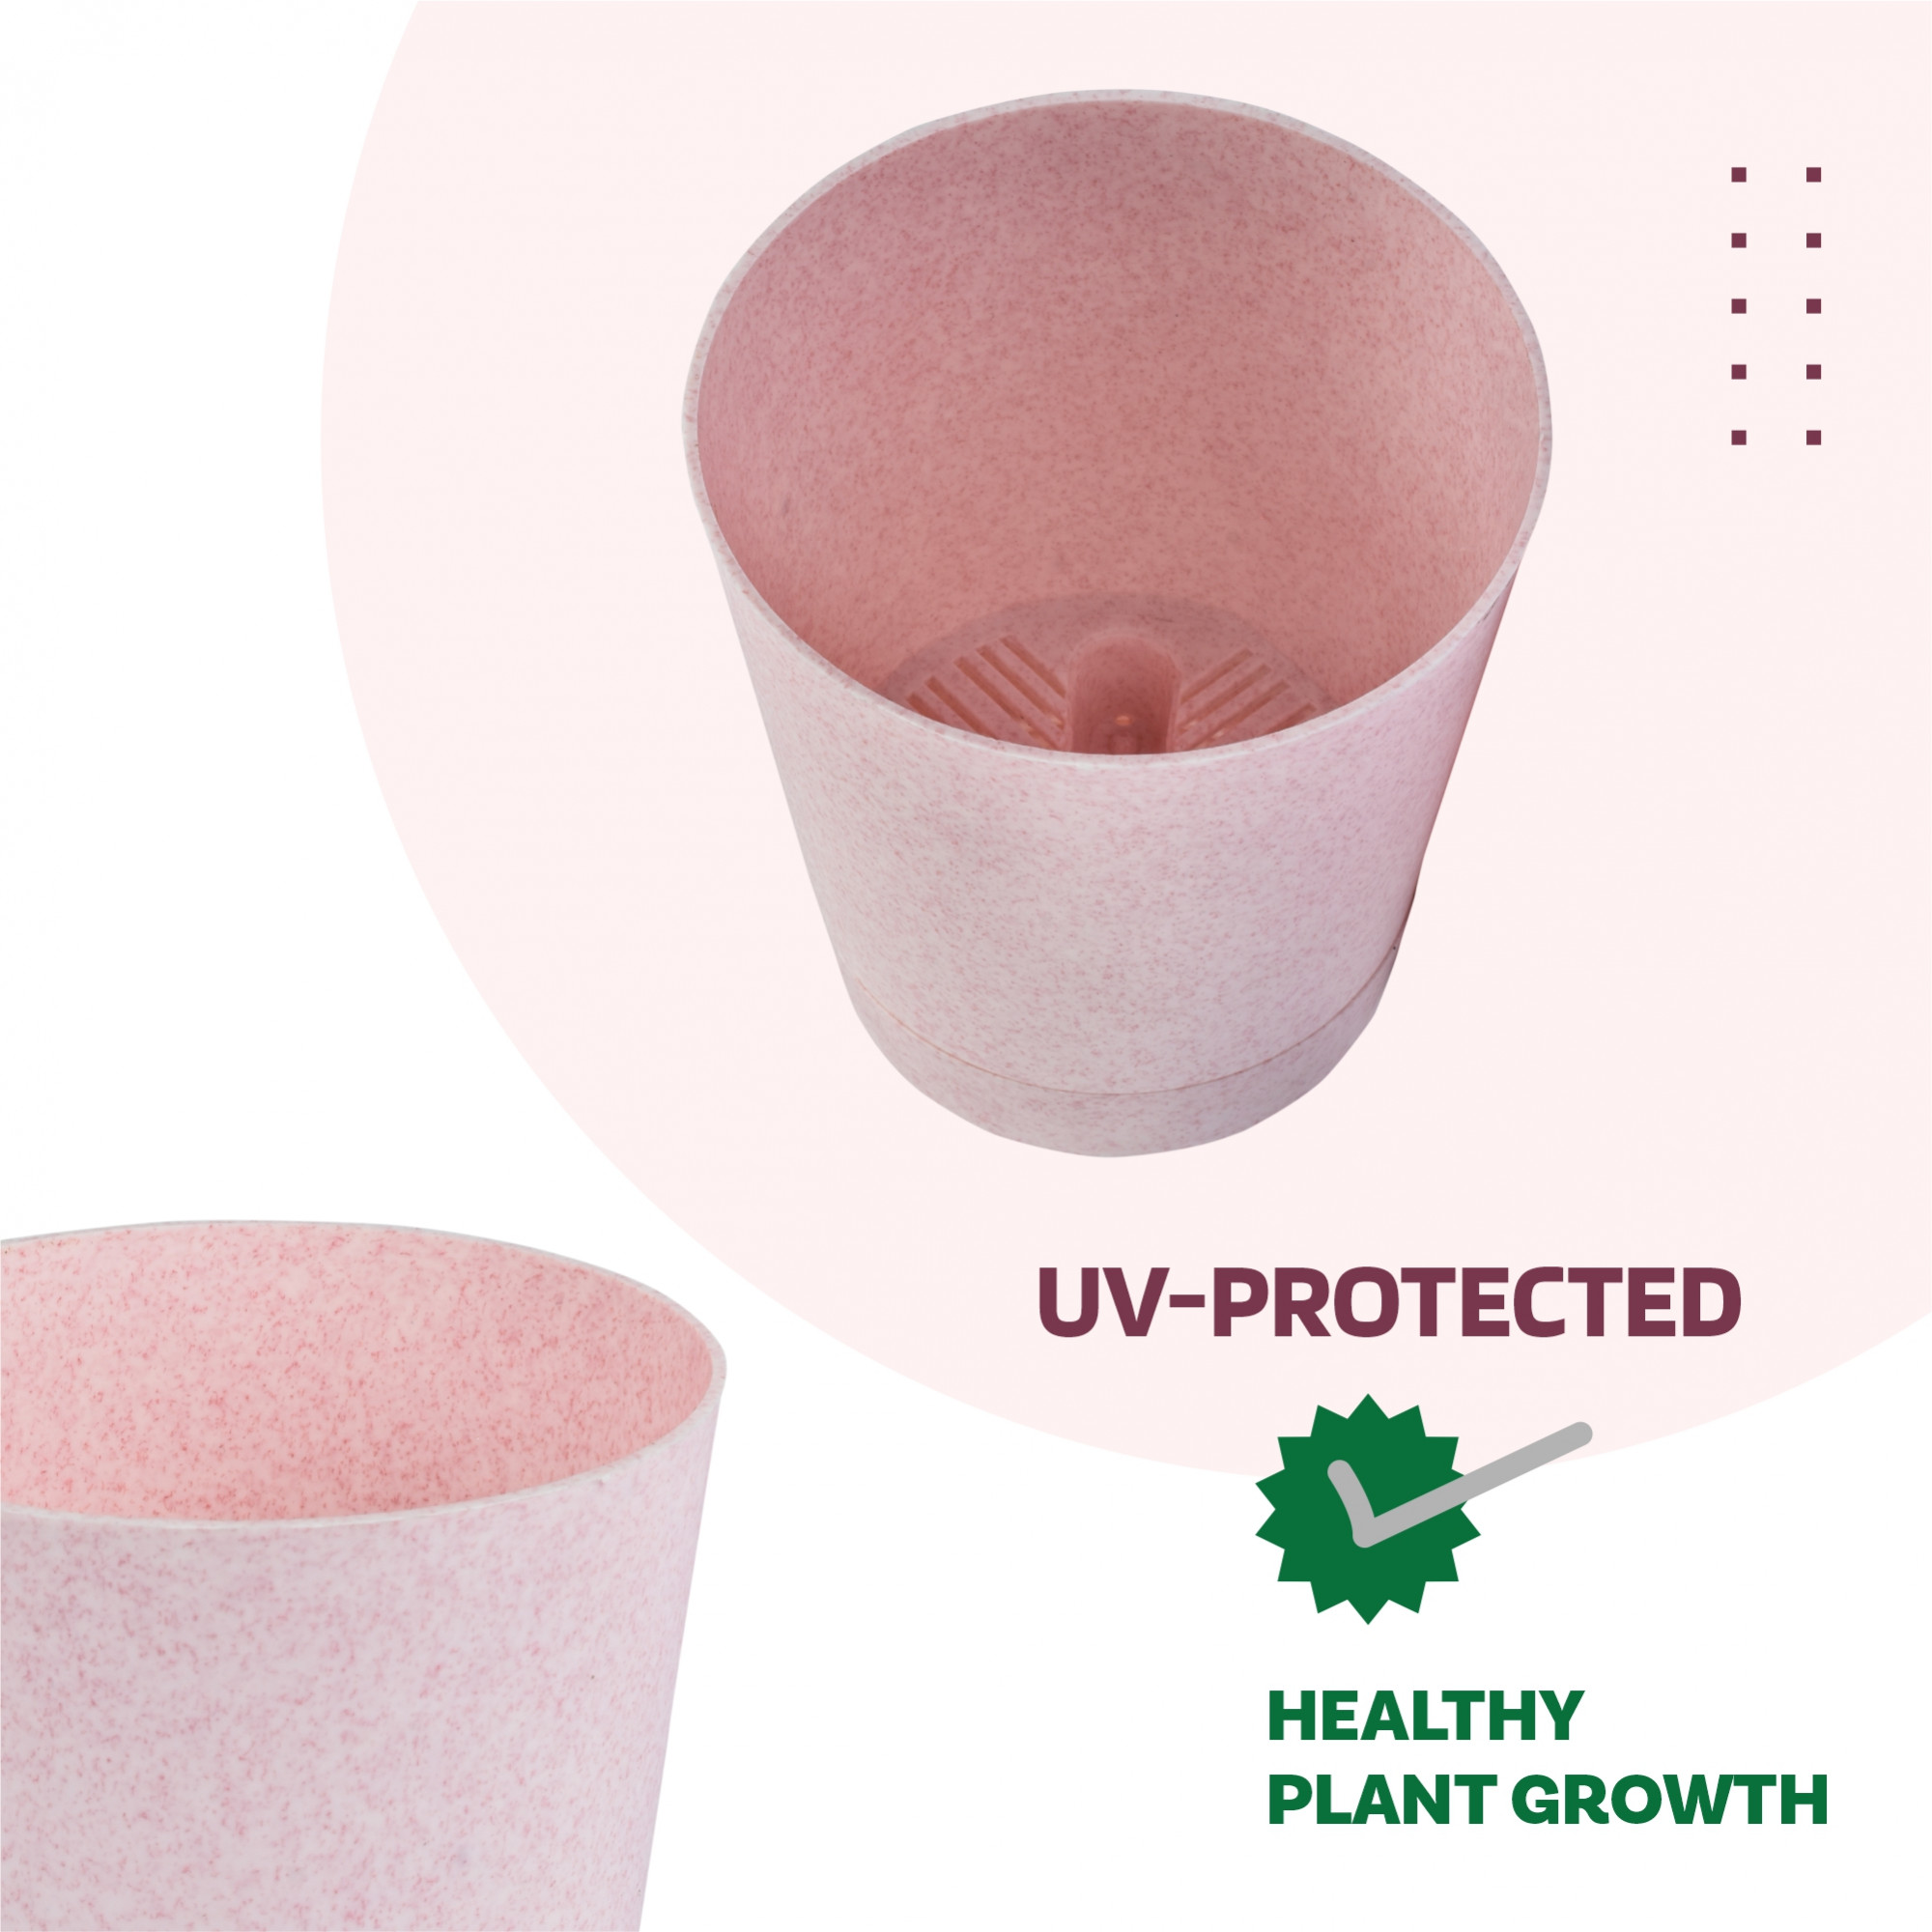 Kuber Industries Flower Pot | Flower Pot for Living Room-Office | Flower Planters for Home-office-Lawns & Garden Décor | Self Watering Flower Planters Pots | Marble Titan | 4 Inch | Pink